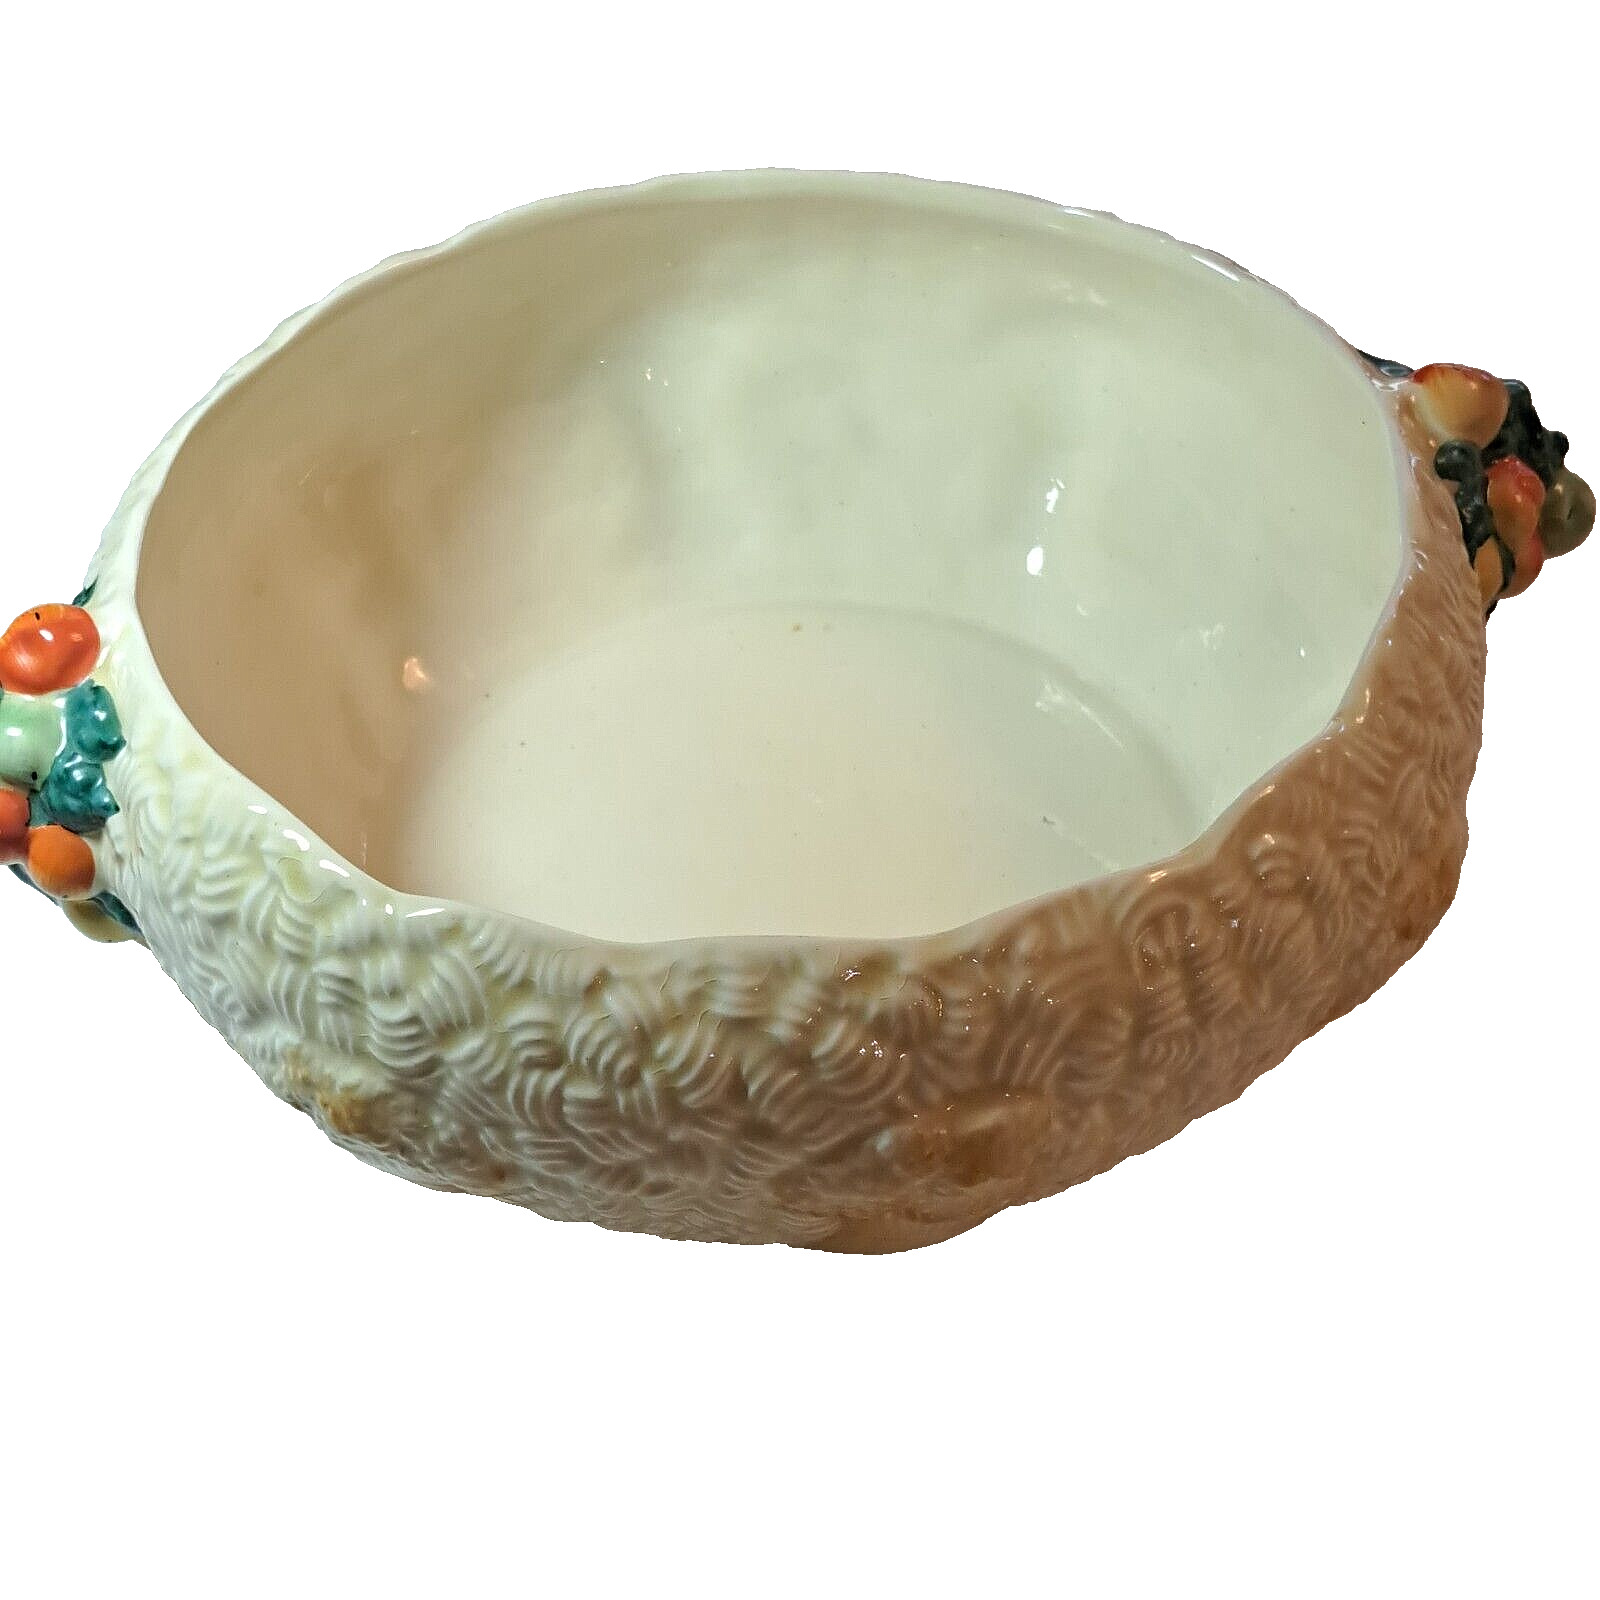 Newport Pottery Clarice Cliff bowl Celtic Harvest Pattern 1940s  12\'\' x3.25\'\'